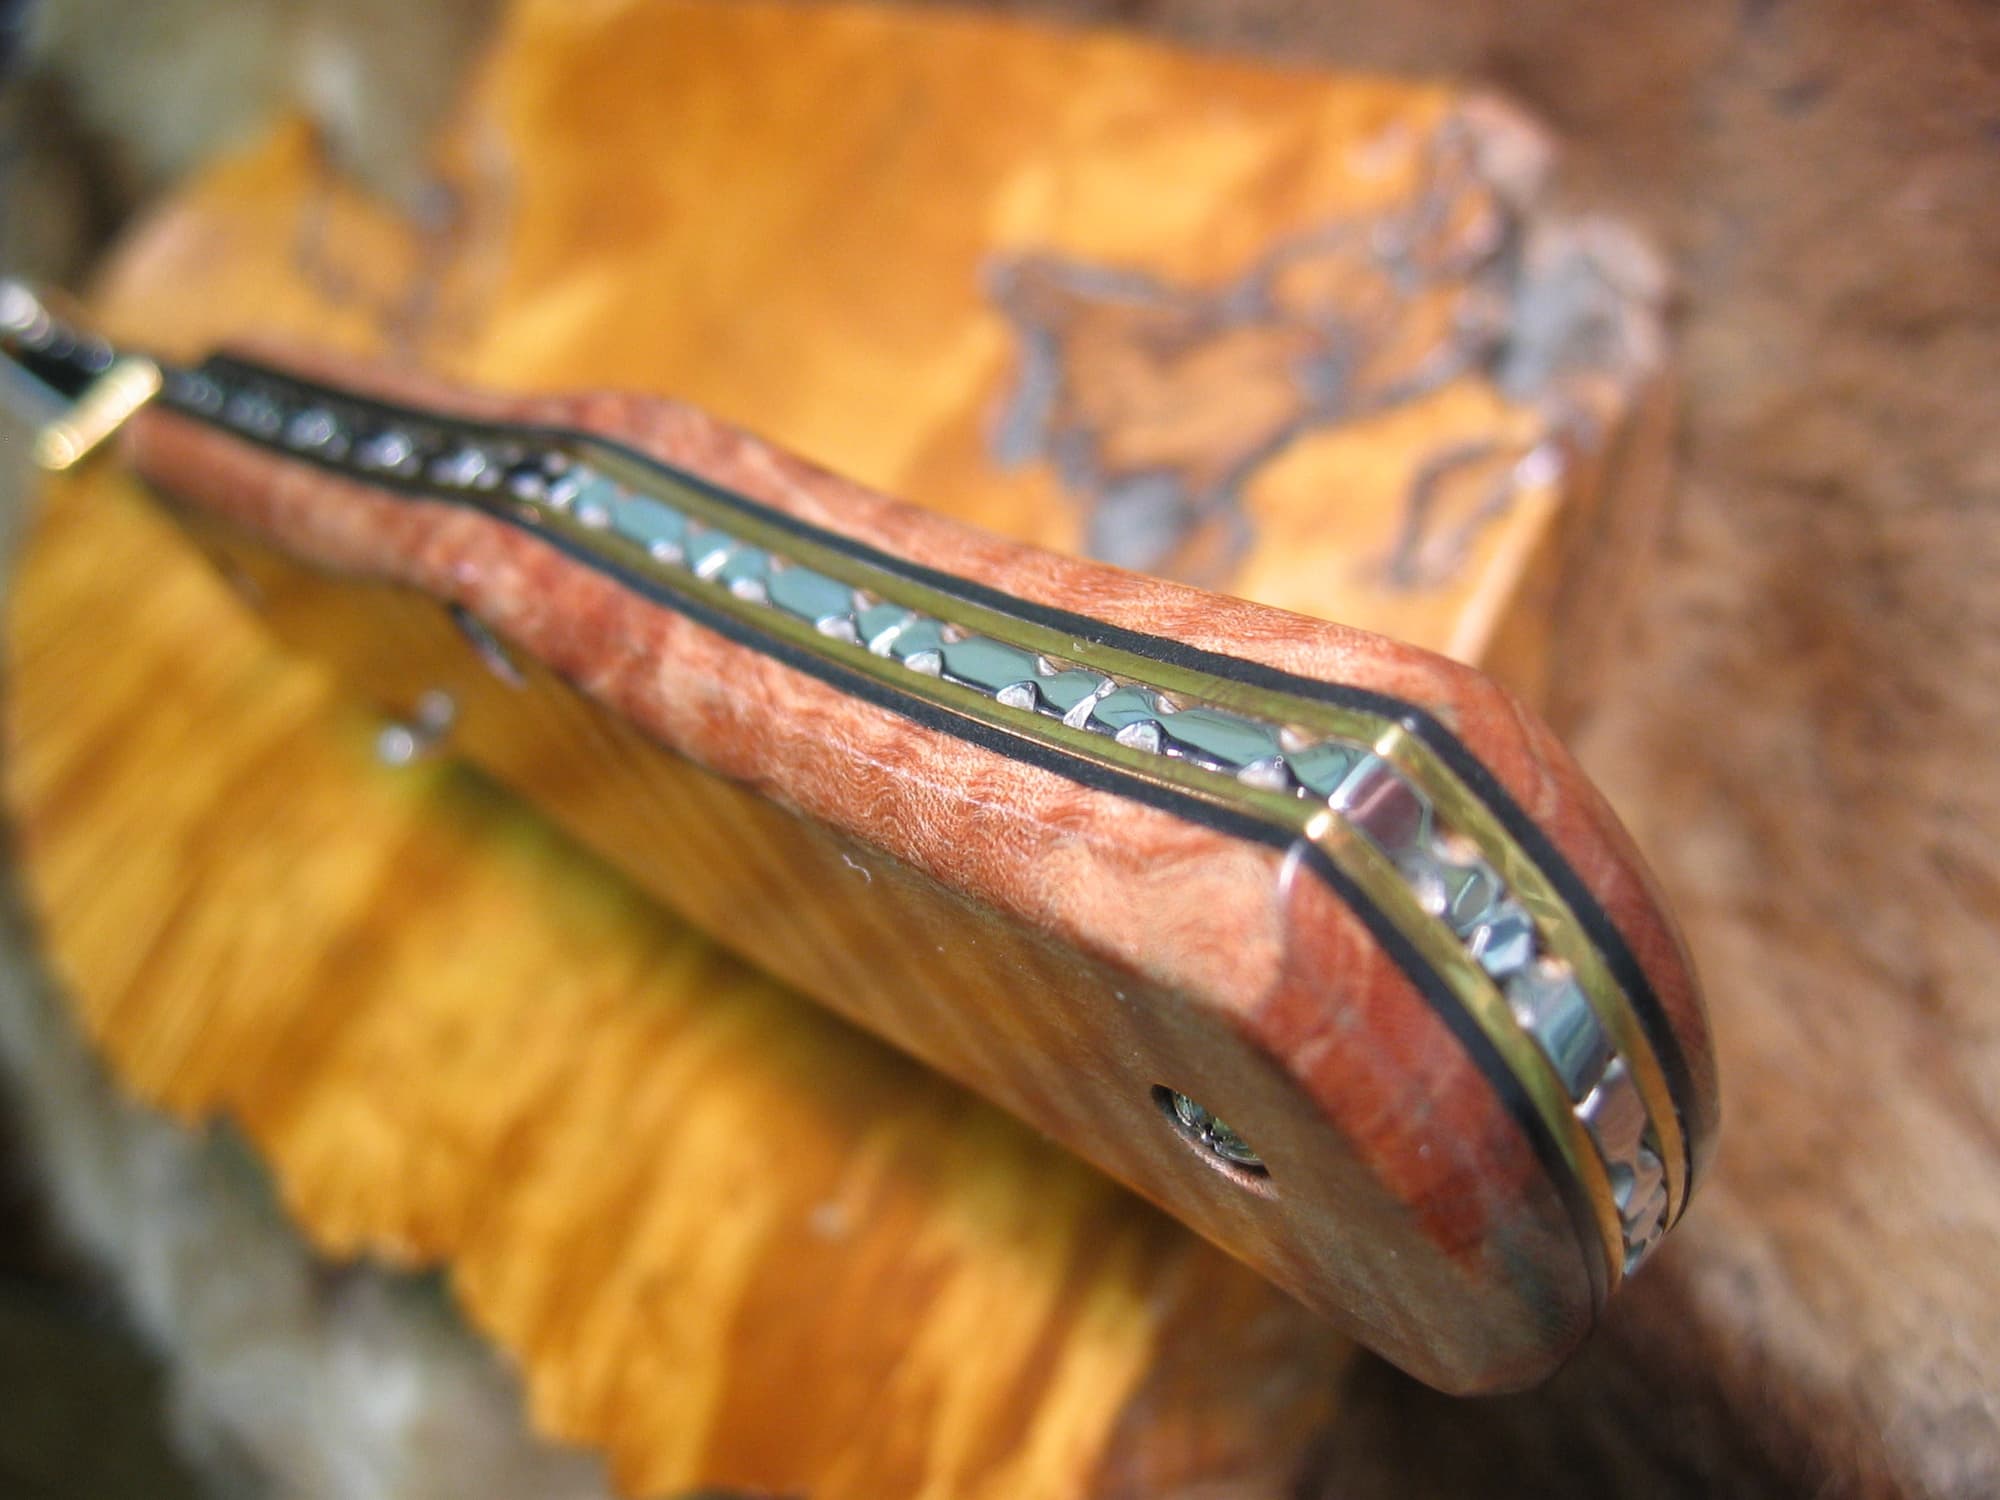 Flame maple handle of folding knife showing liners and filework